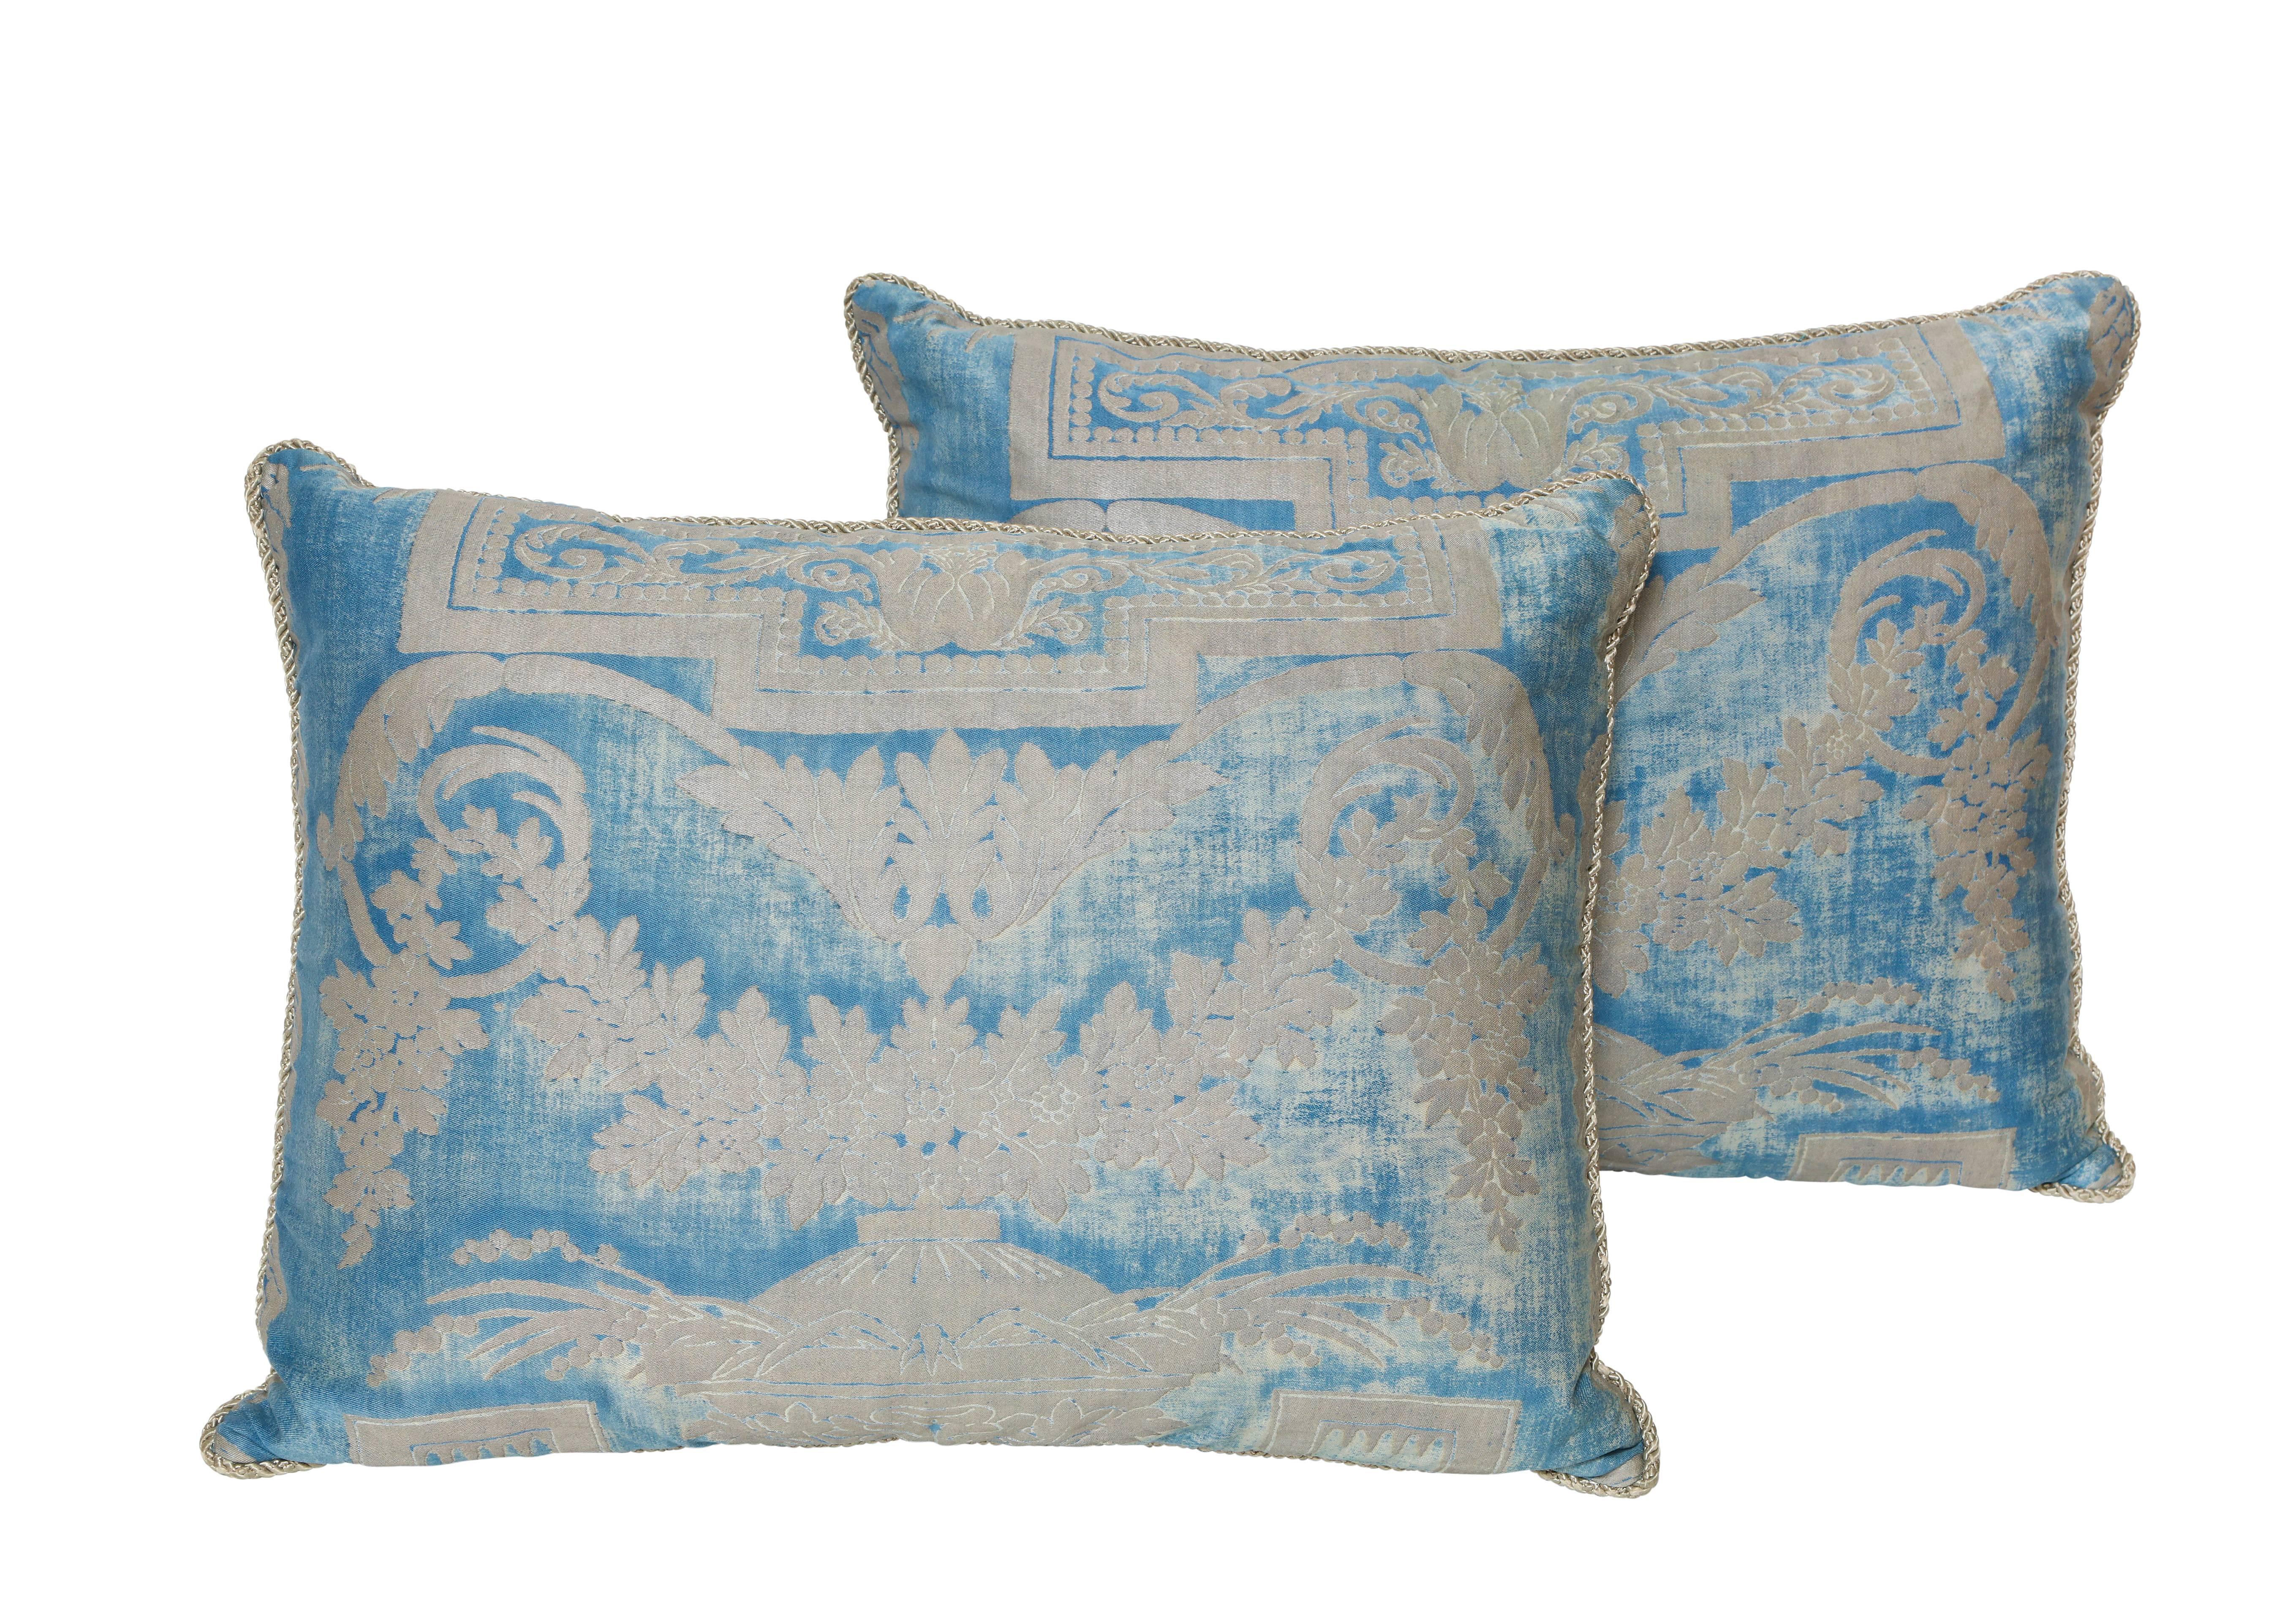 A set of three Fortuny silk pillow cushions in metallic blue and silver fabric depicting a neoclassical design with a draped garland motif, with braided trim and woven back
50 down/50 feather insert
Newly made using vintage Fortuny fabric, circa